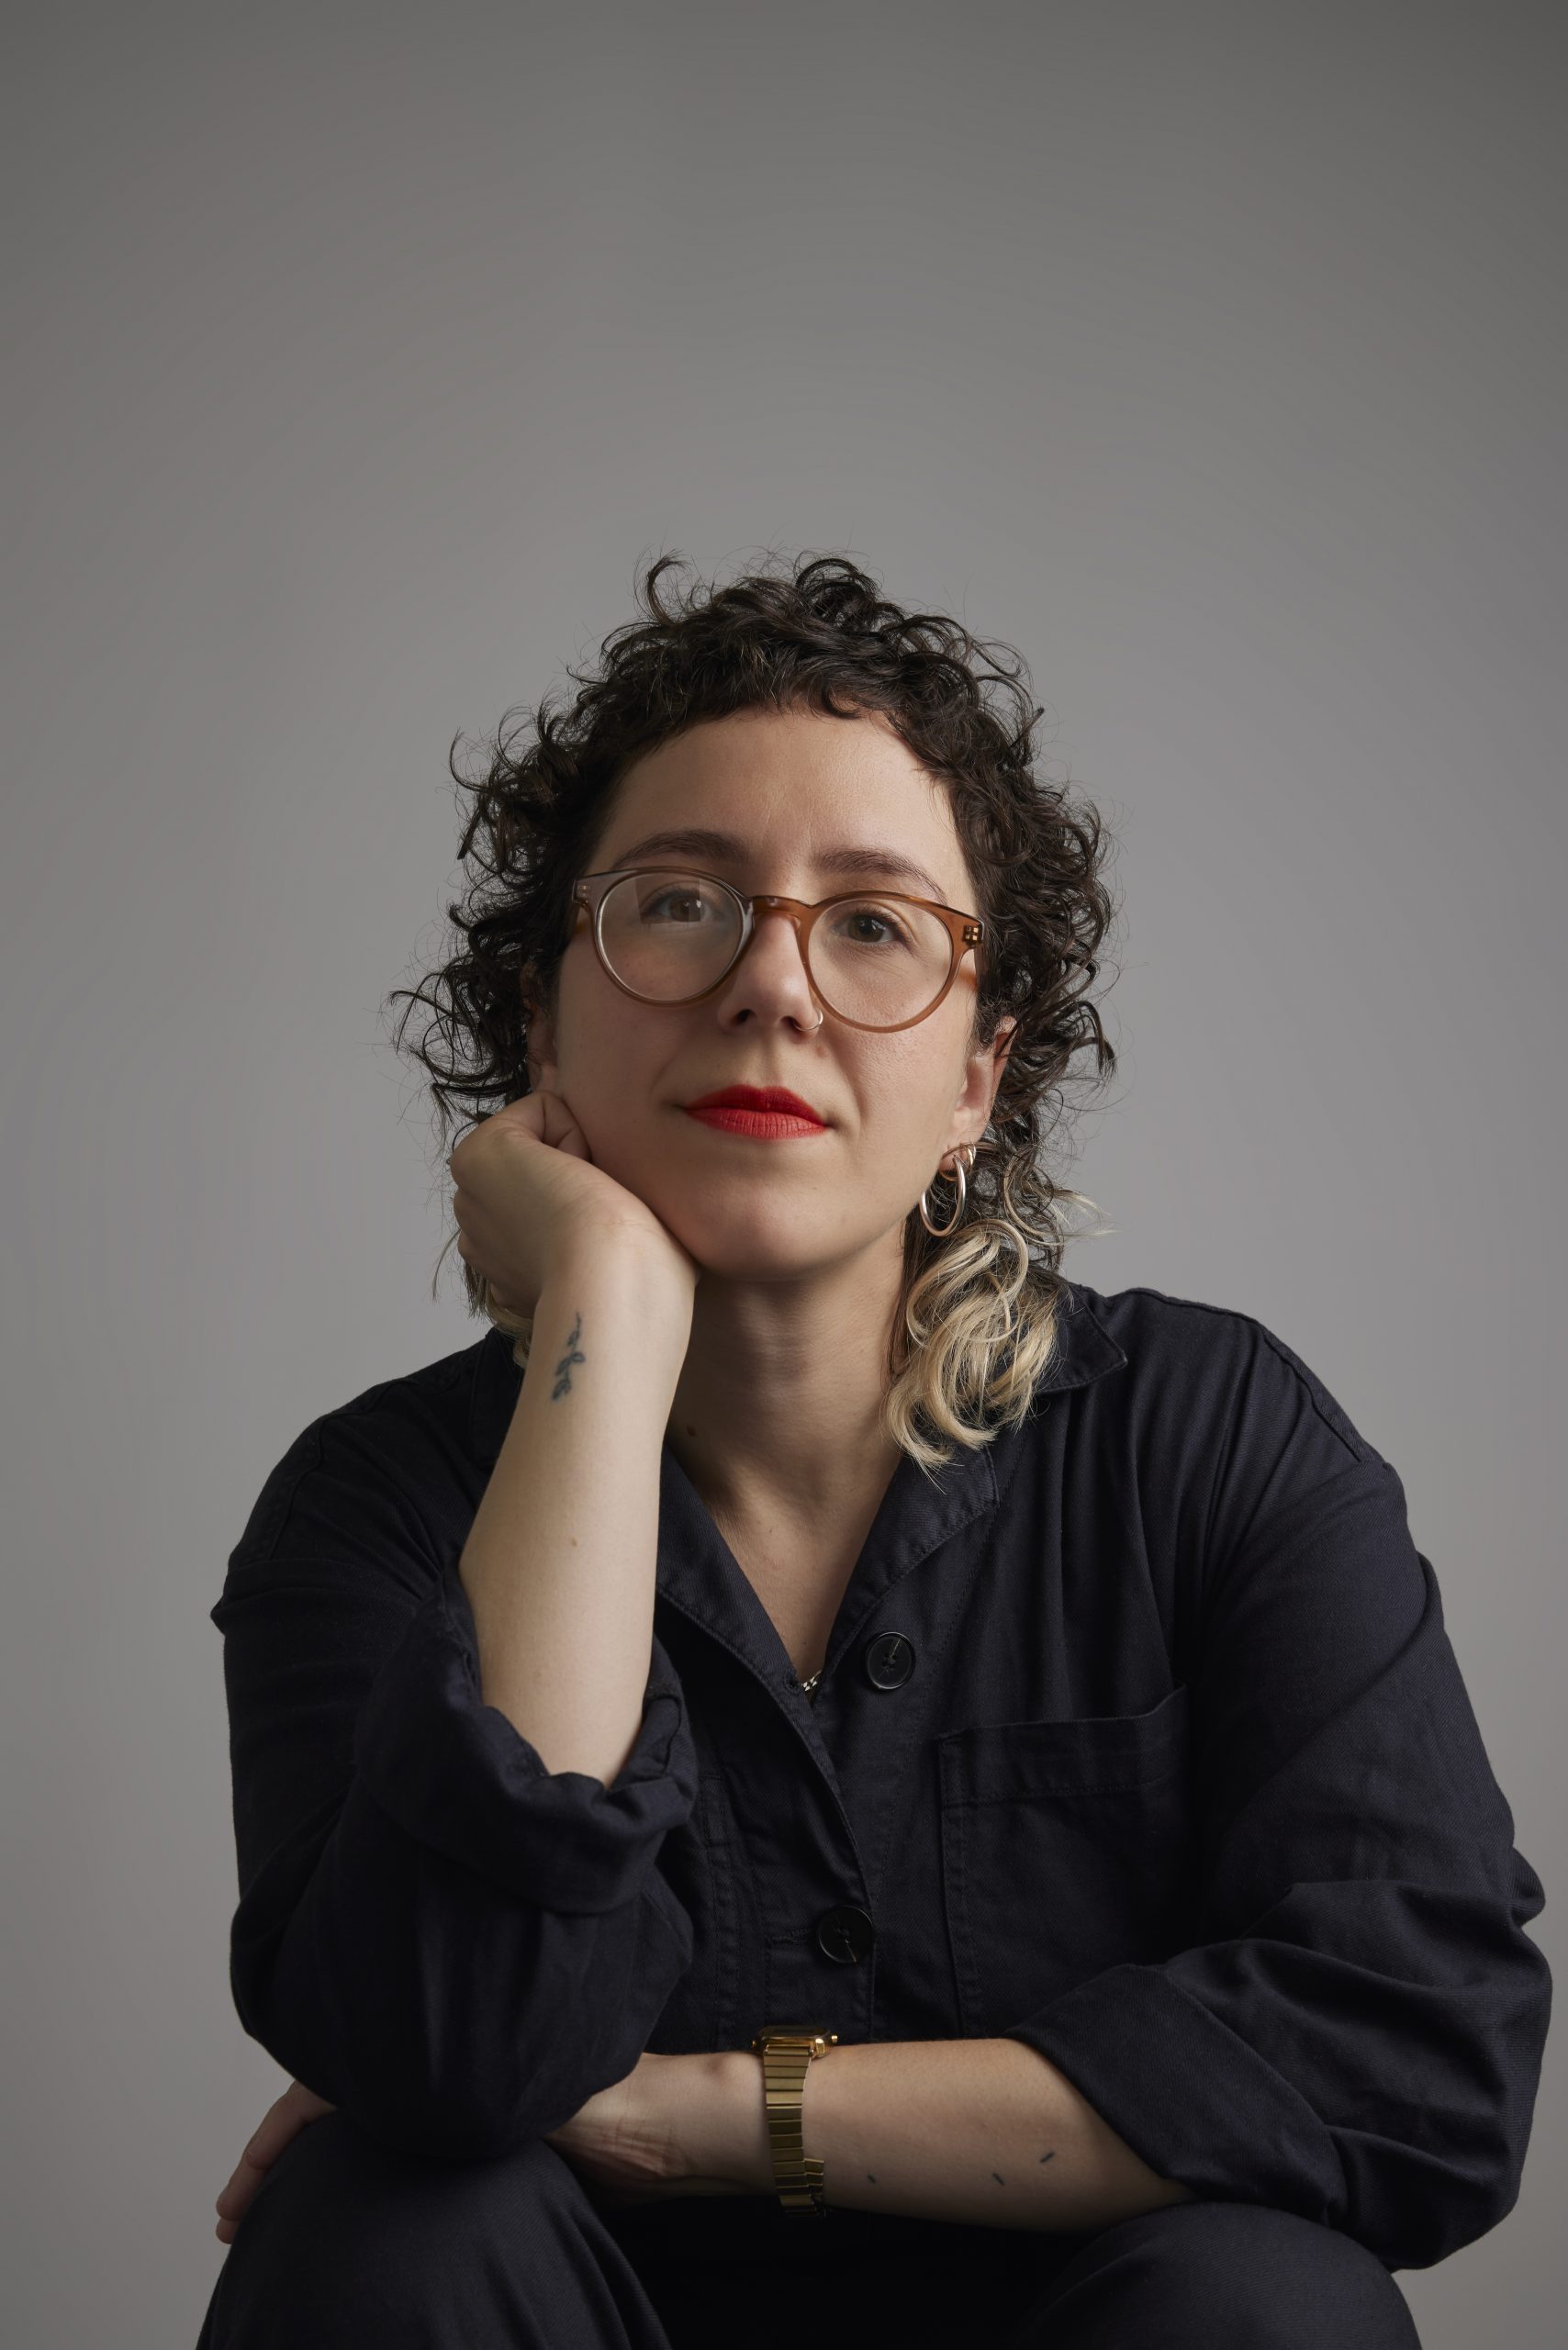 Portrait of a white woman in her 30s looking at the camera. She's wearing a black shirt, has curly hair with bleached ends and a short fringe, wears bright red lipstick, light brown glasses, and a gold watch. She has a small tattoo on her wrist.